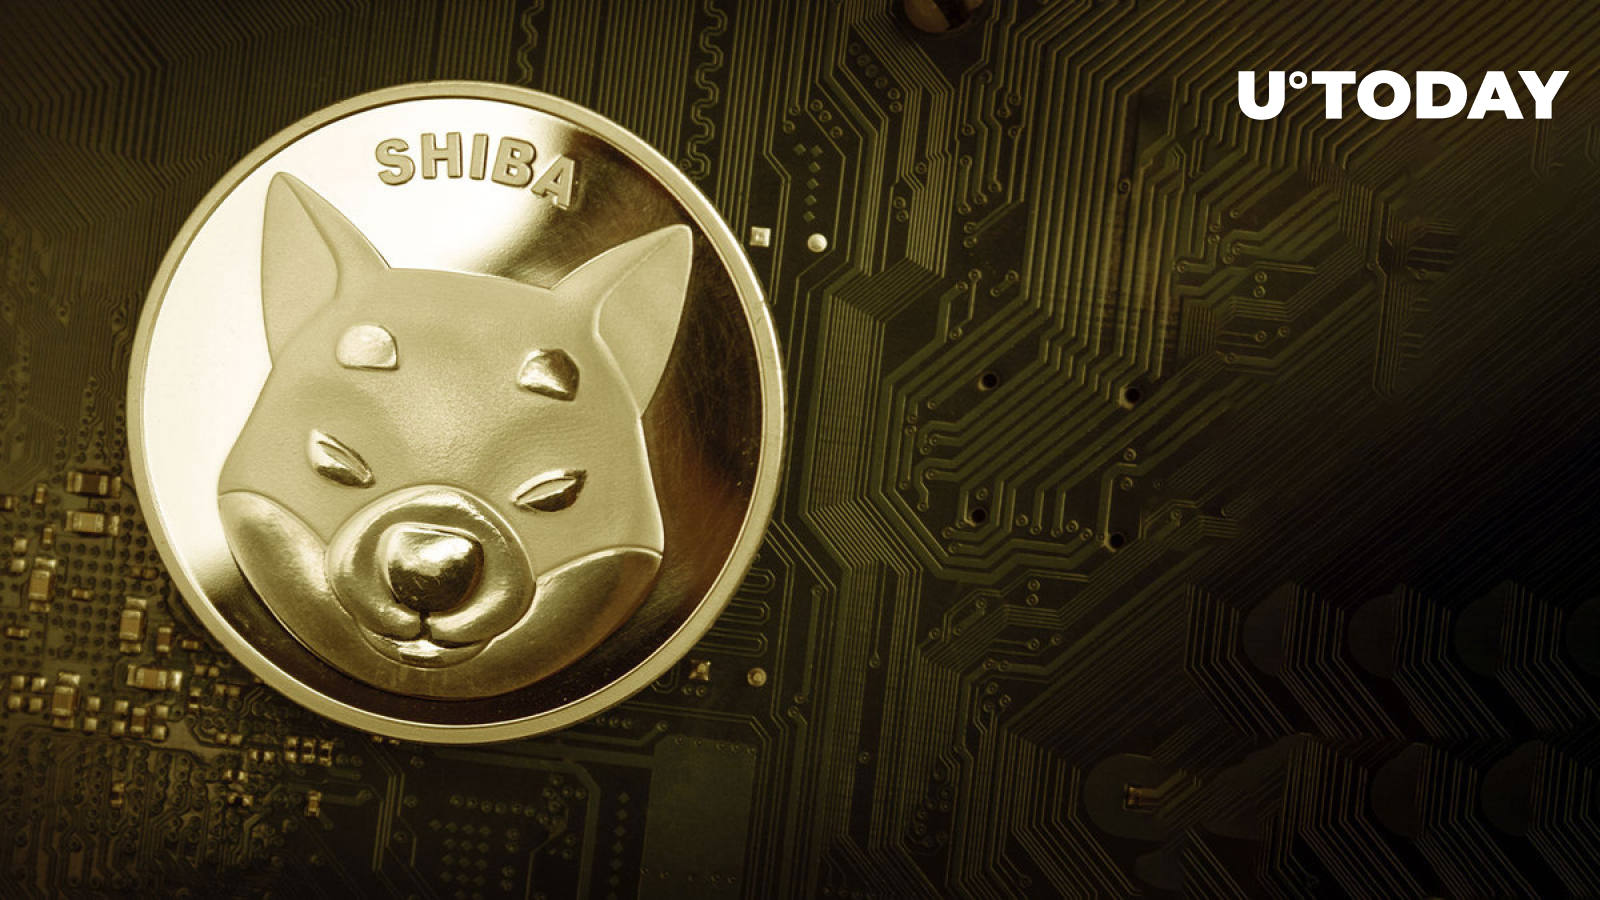 270 Billion Shiba Inu (SHIB) Sold by Bankrupt Crypto Broker, Here’s How Price Reacted